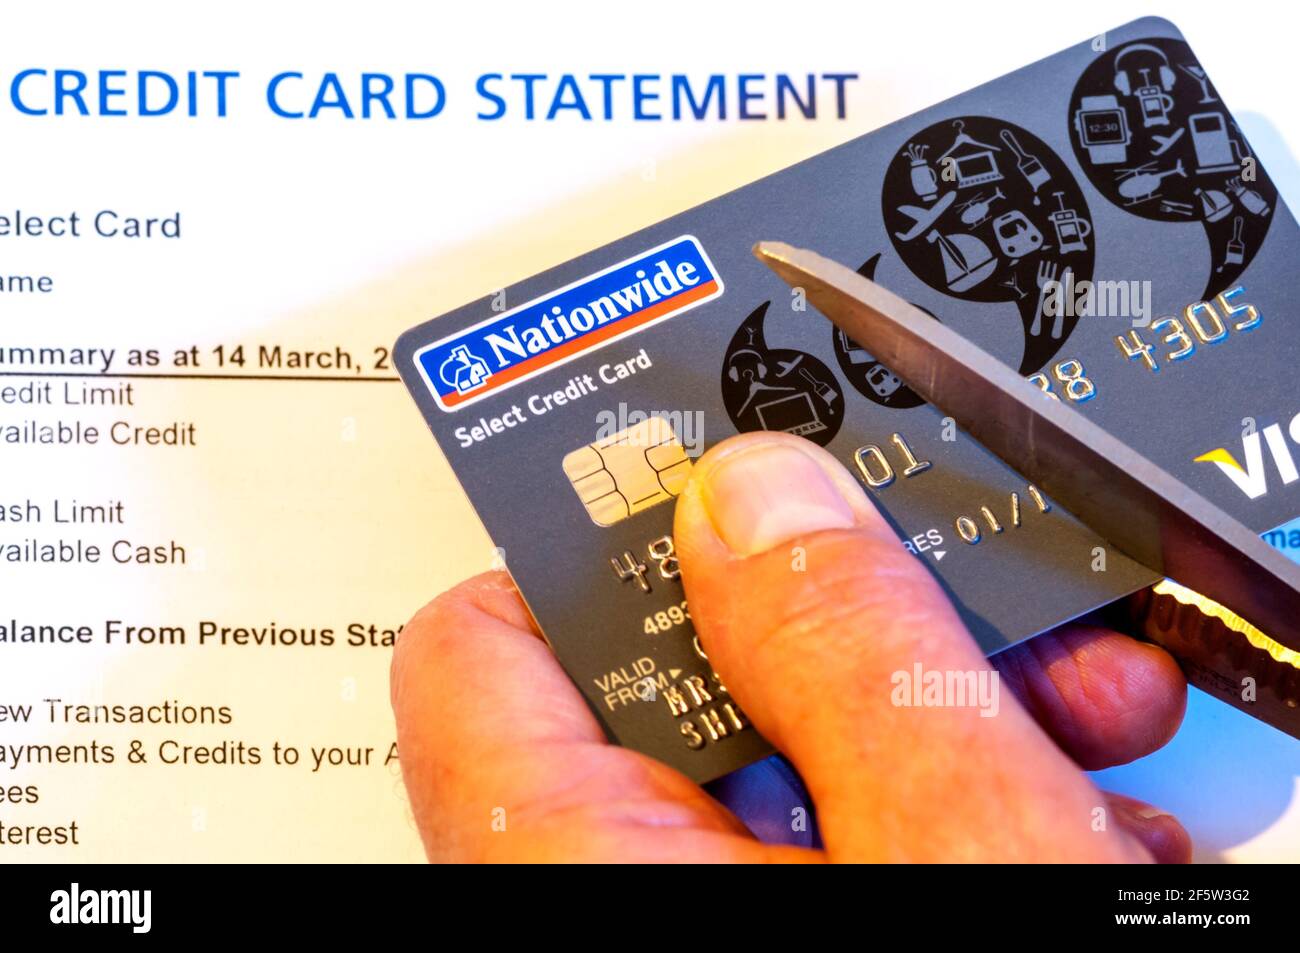 Credit card statement with hand cutting up card, either to avoid debt or prevent identity theft. Stock Photo